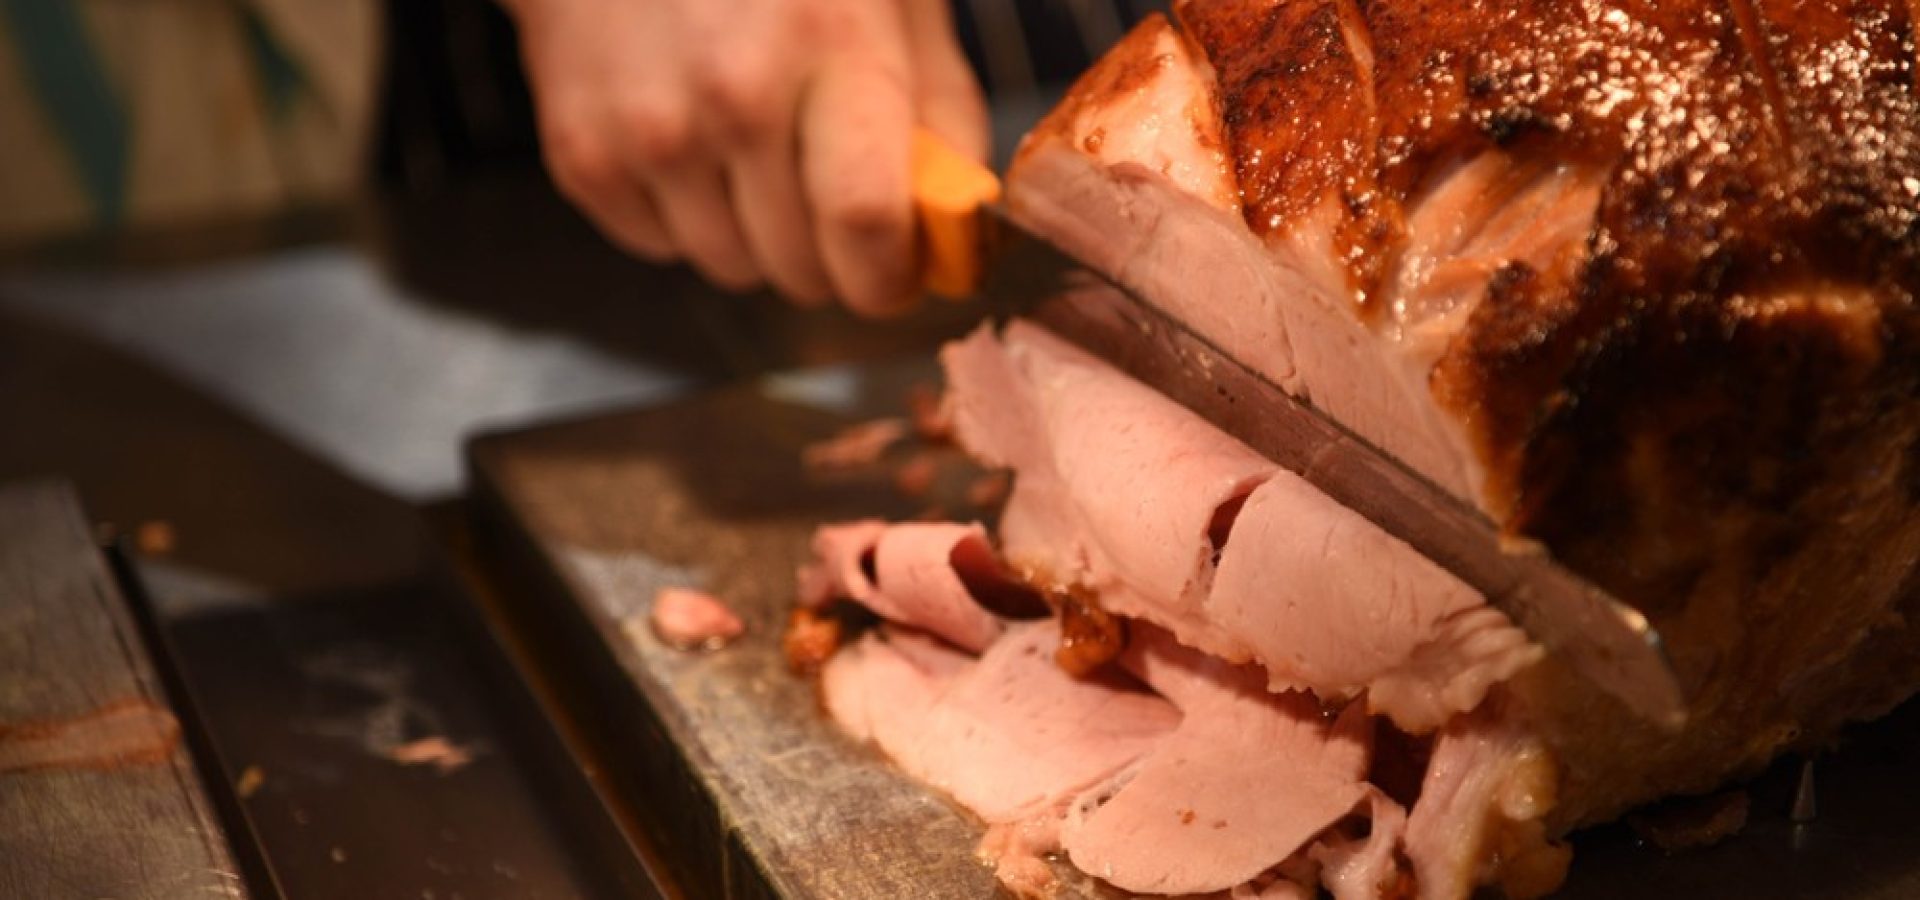 Wibest – Pigs: A chef slicing a cooked ham.